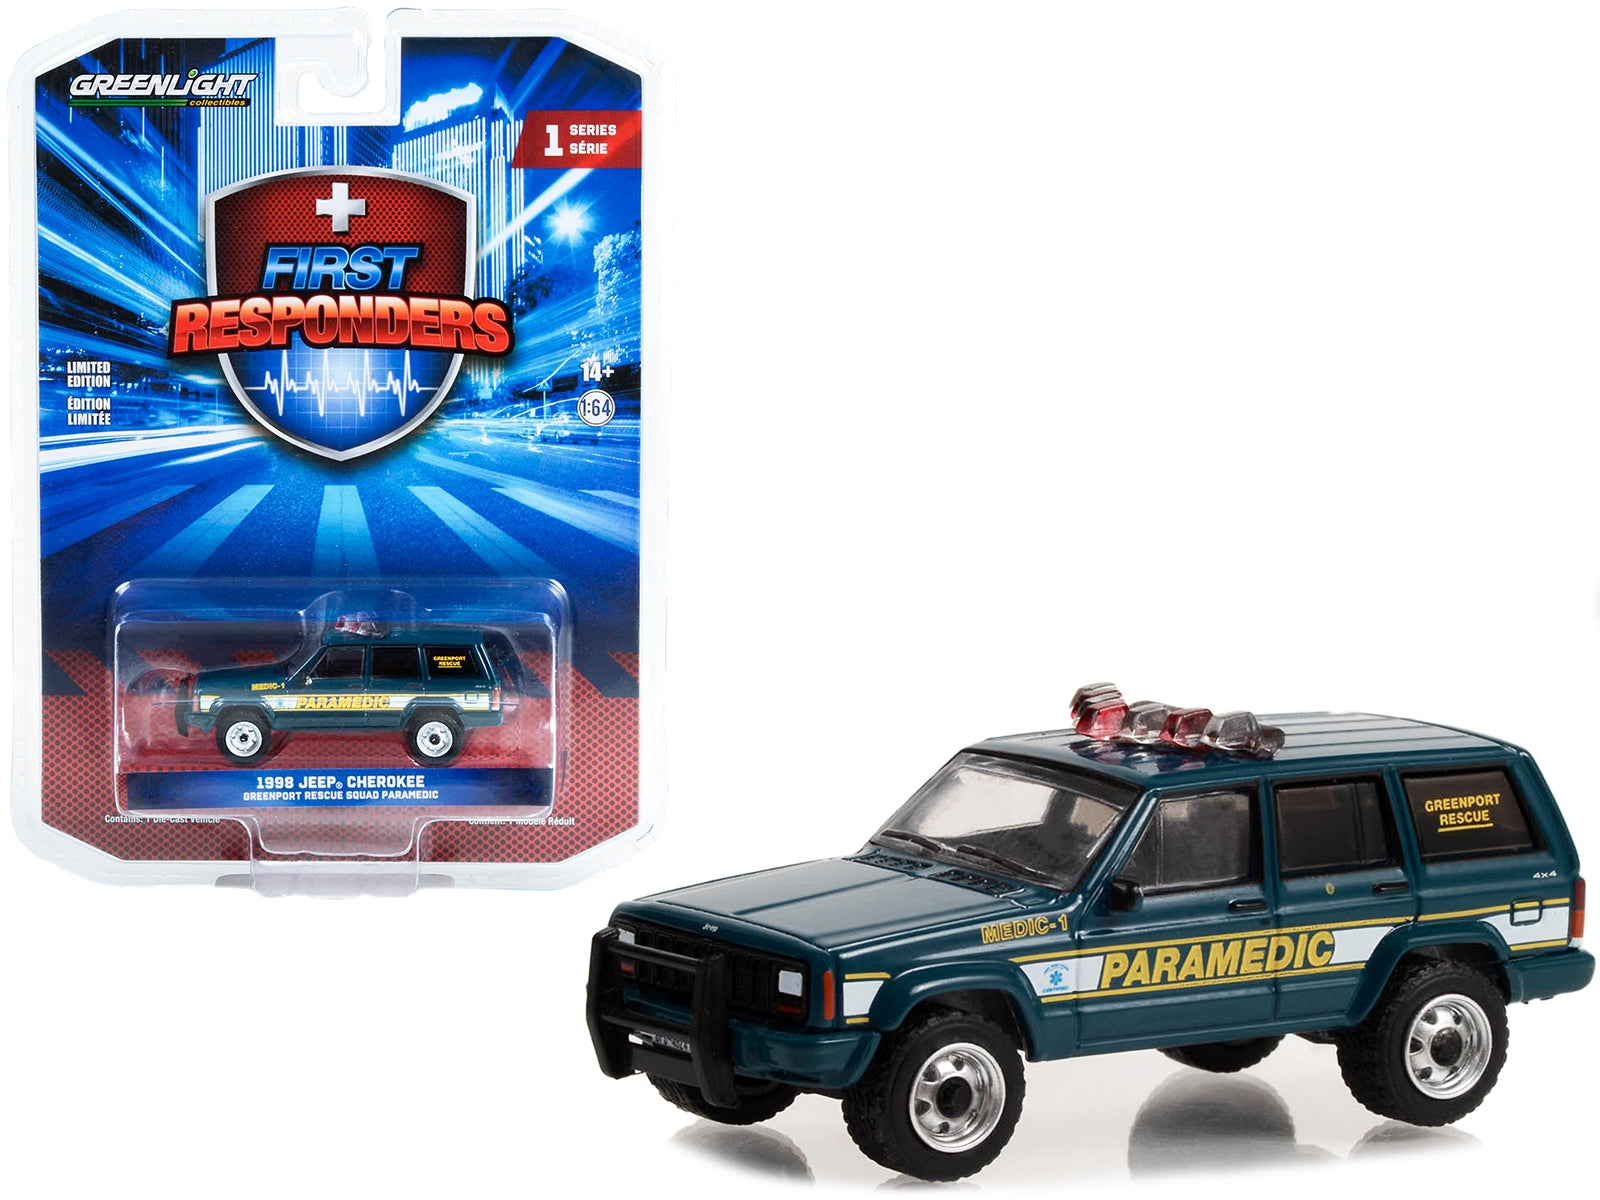 1998 Jeep Cherokee Blue "Greenport Rescue Squad Paramedic Greenport New York" "First Responders" Series 1 1/64 Diecast Model Car by Greenlight Greenlight